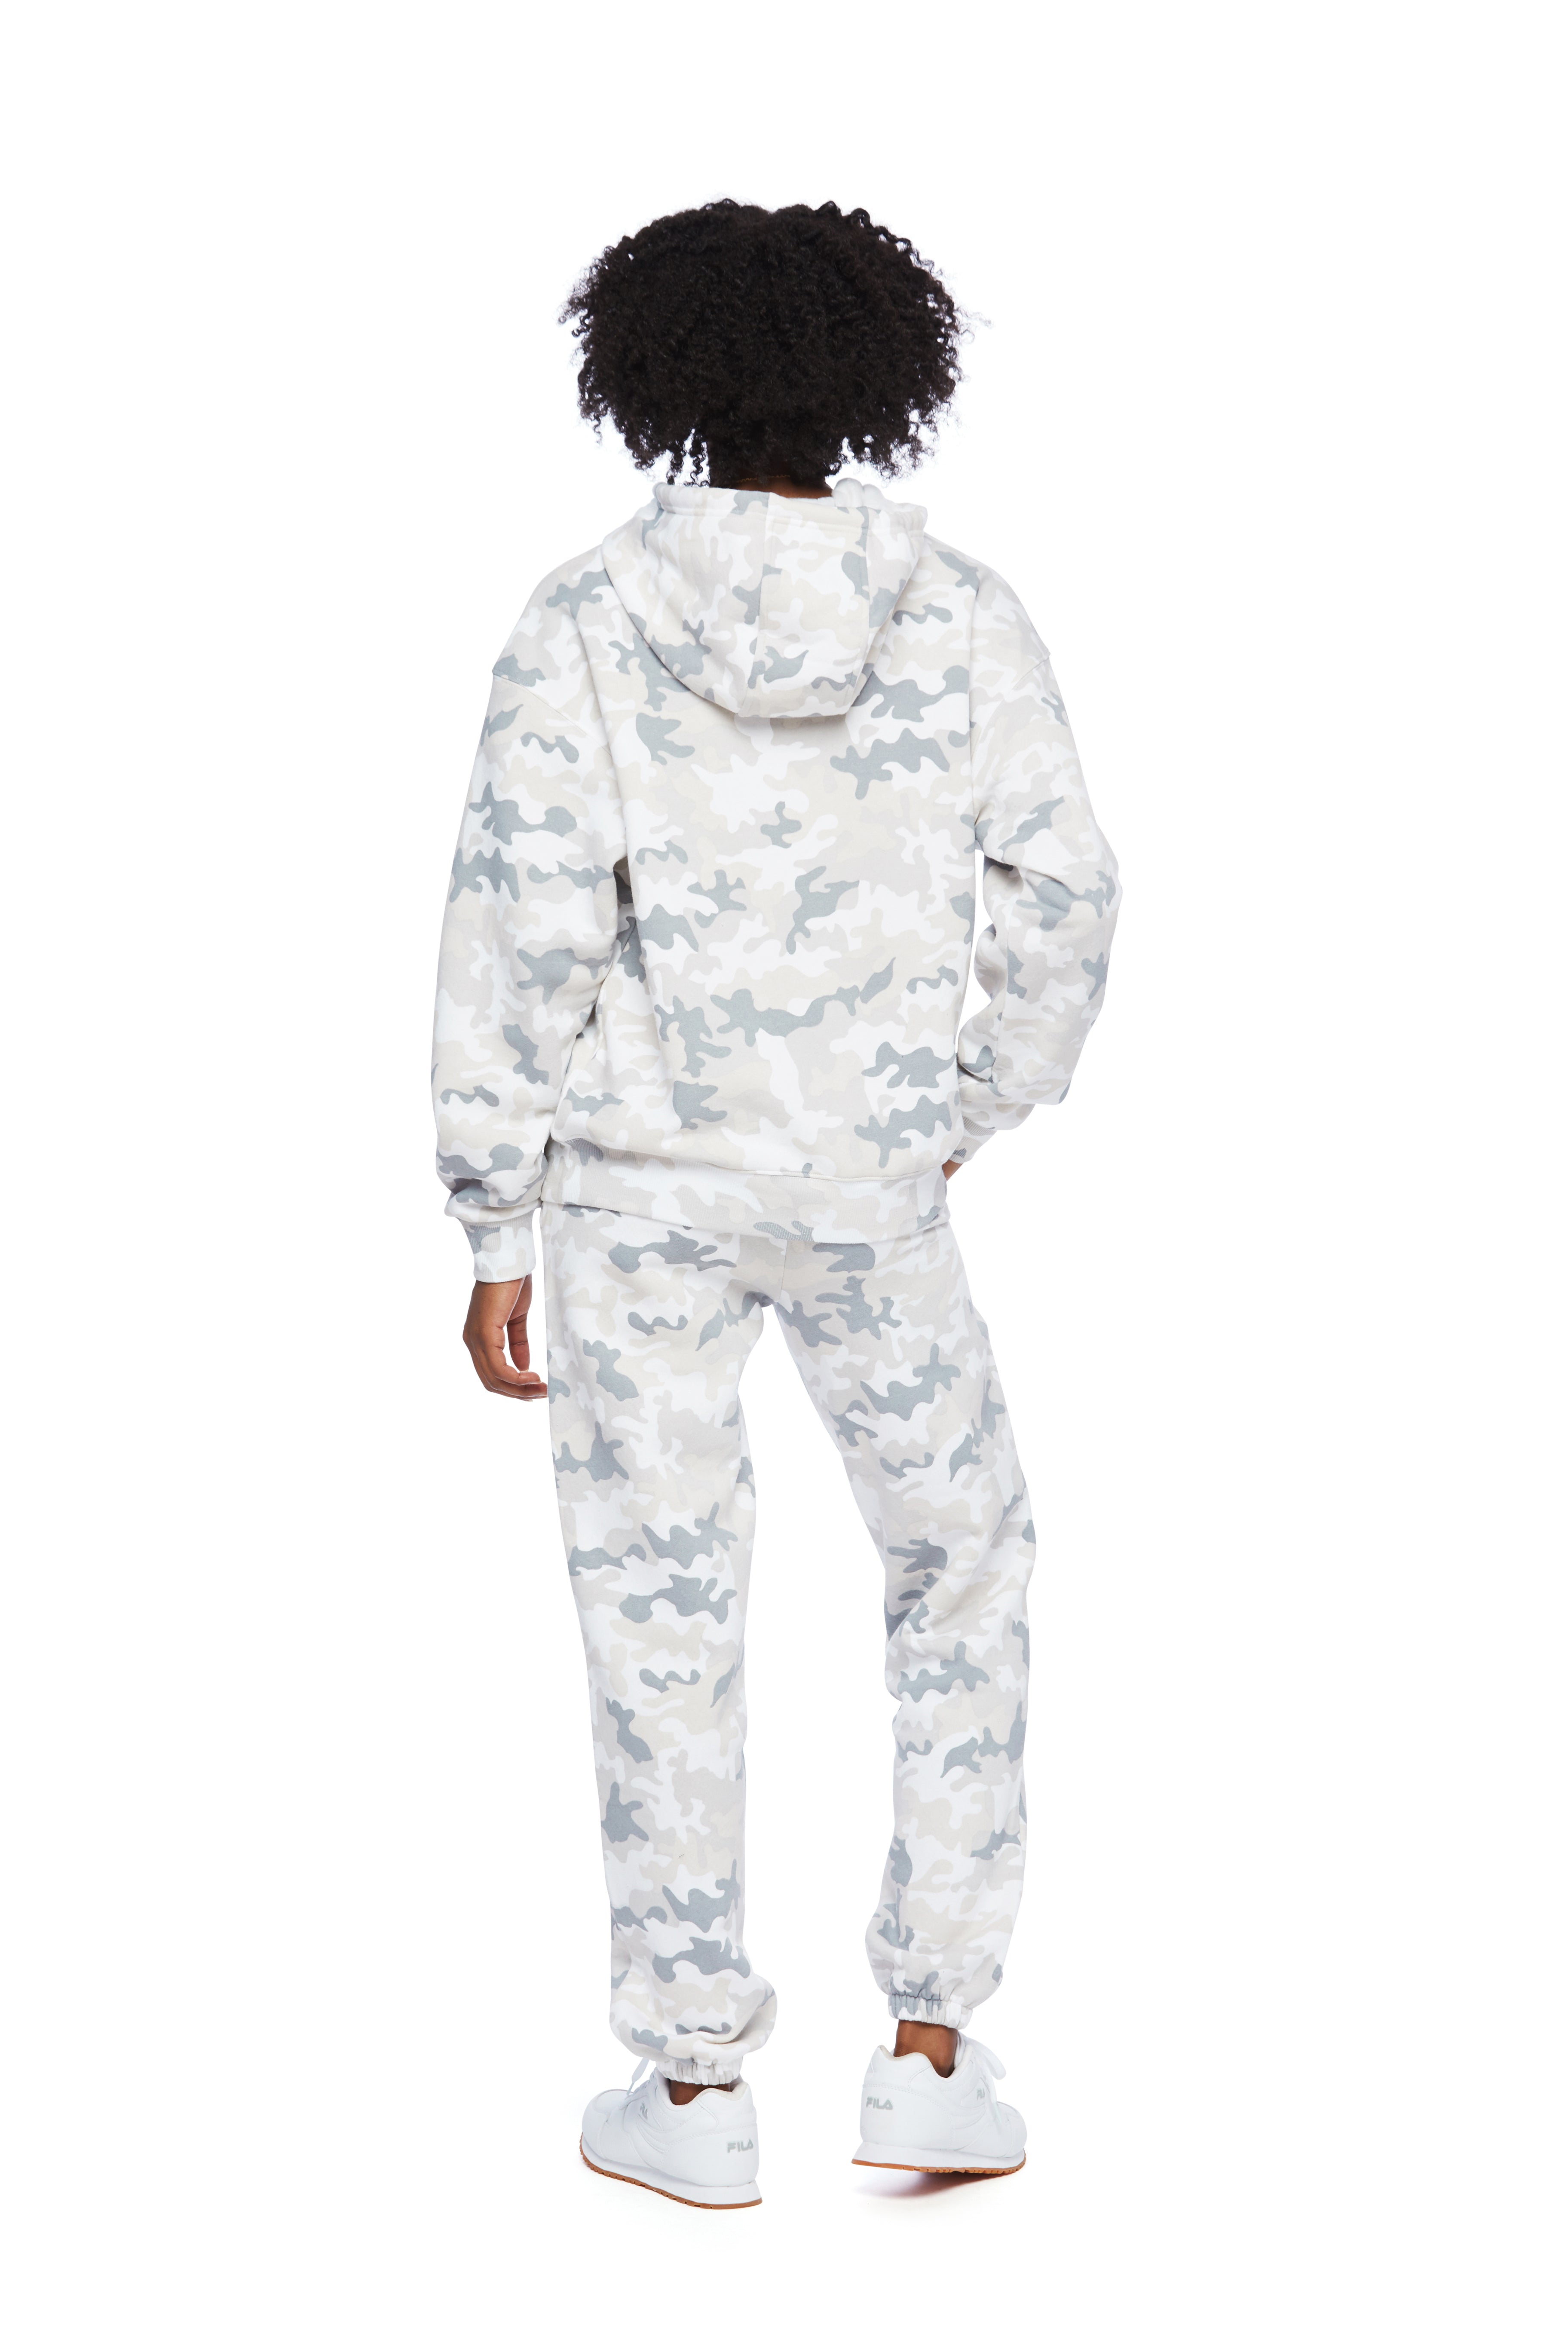 Nova &amp; Chloe Sweatsuit Set in White Camo from Lazypants - always a great buy at a reasonable price.